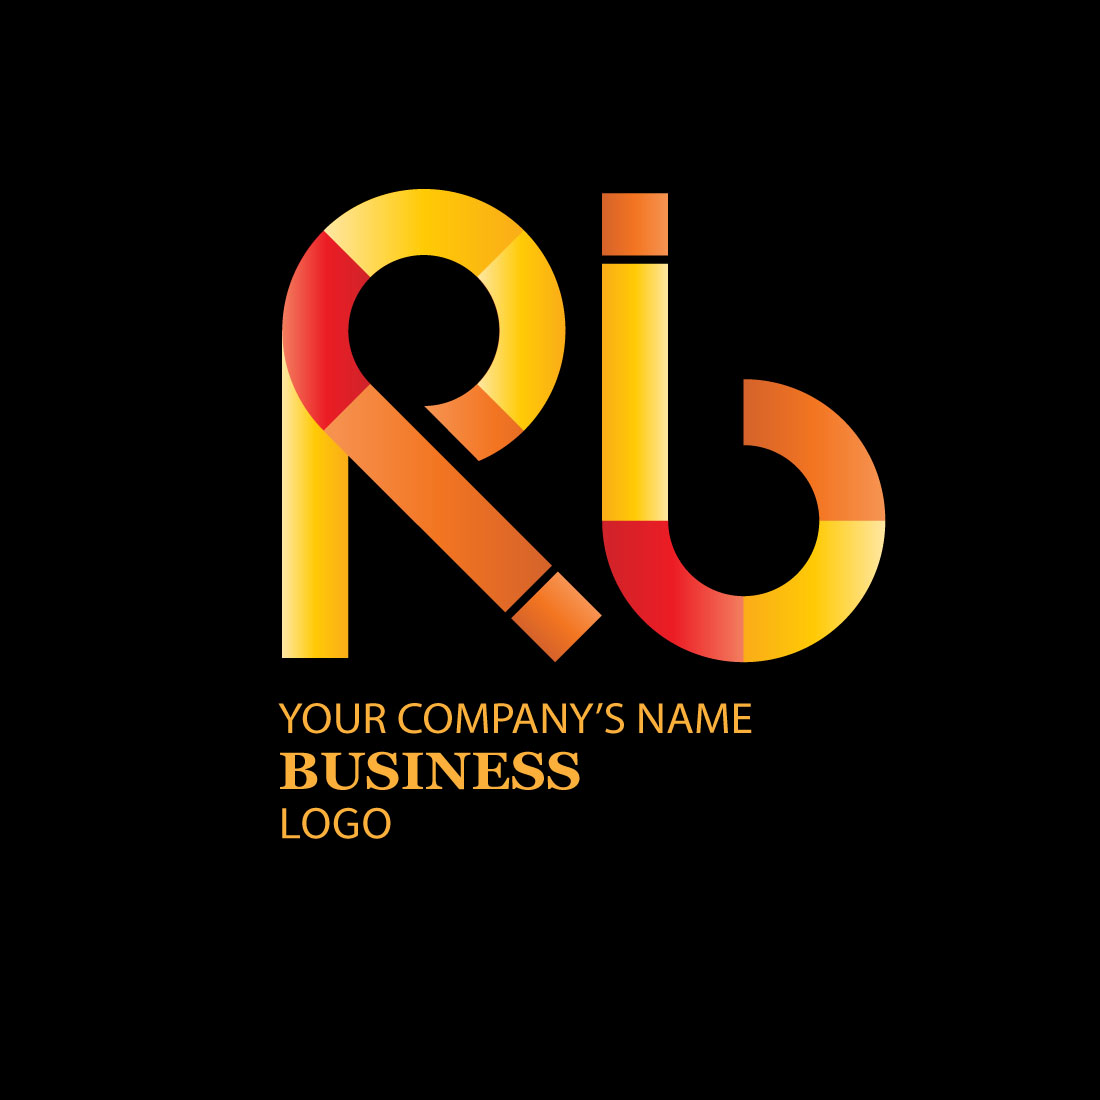 Image of Rb letters logo with wonderful design